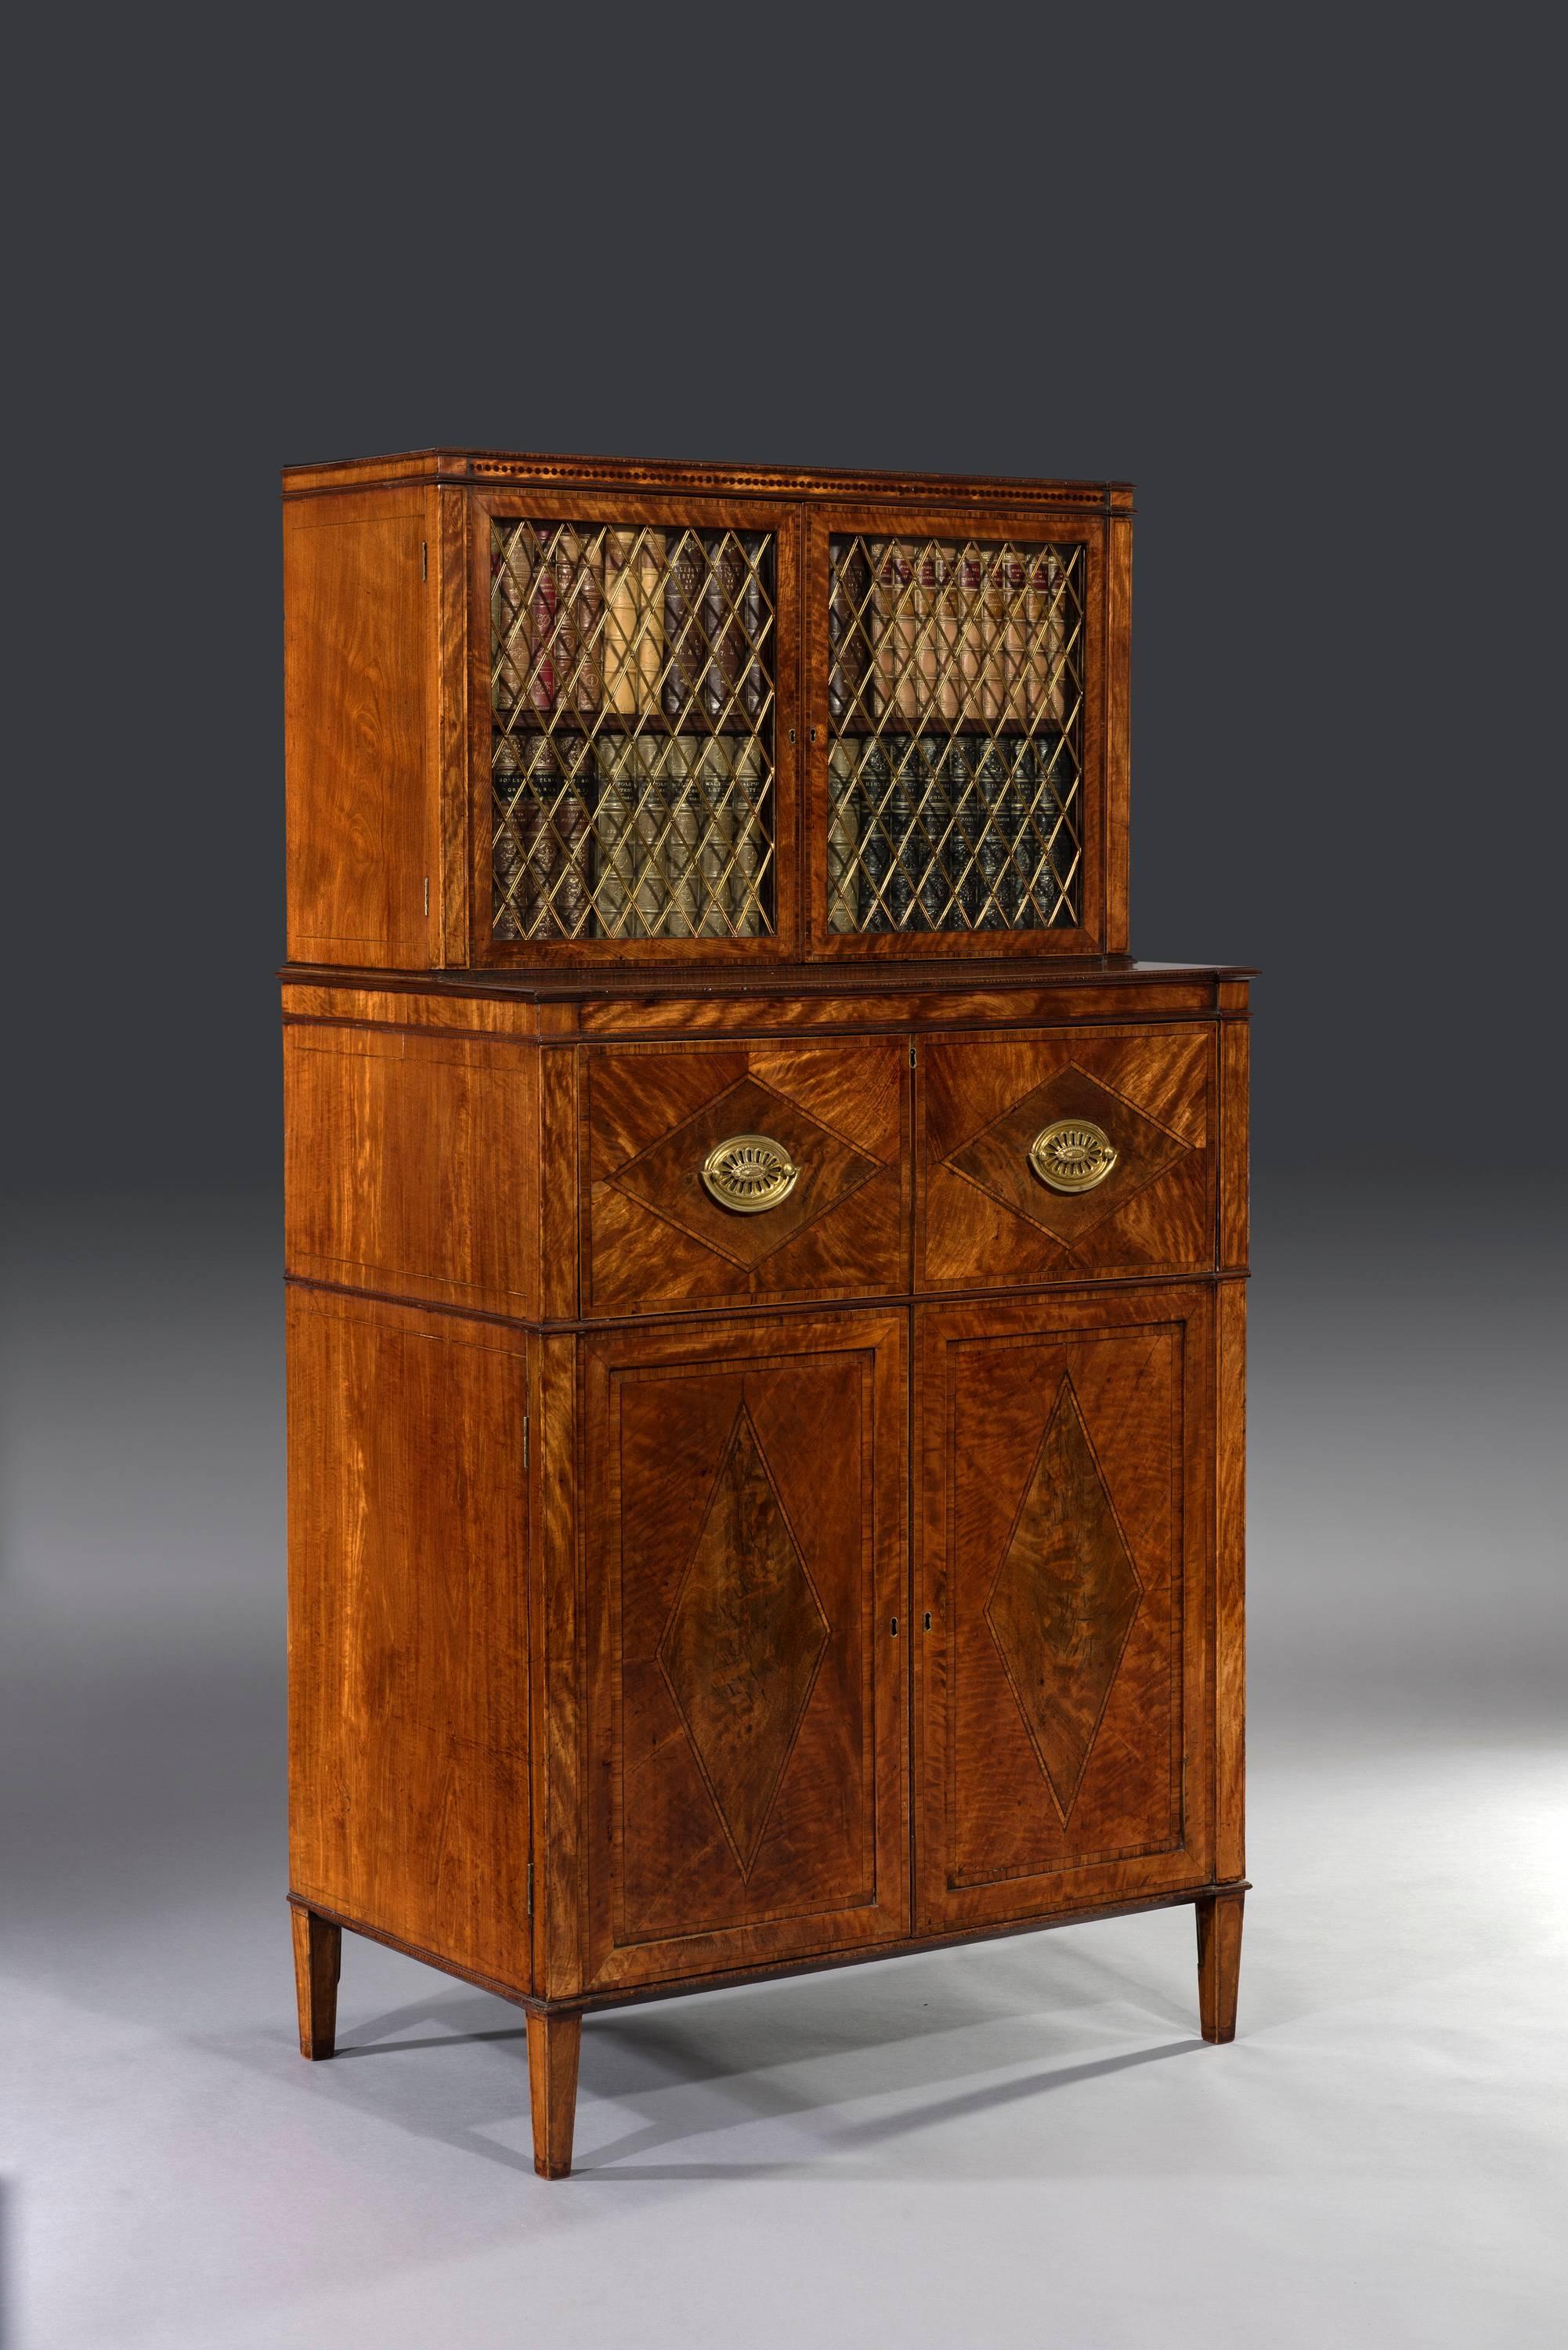 George III Sheraton period 18th century satinwood inlaid secrétaire dwarf bookcase. 

The inlaid and crossbanded satinwood two-door bookcase above a secrétaire chest is fitted with lozenge-shaped gilt-brass grills, glass panels and a mahogany